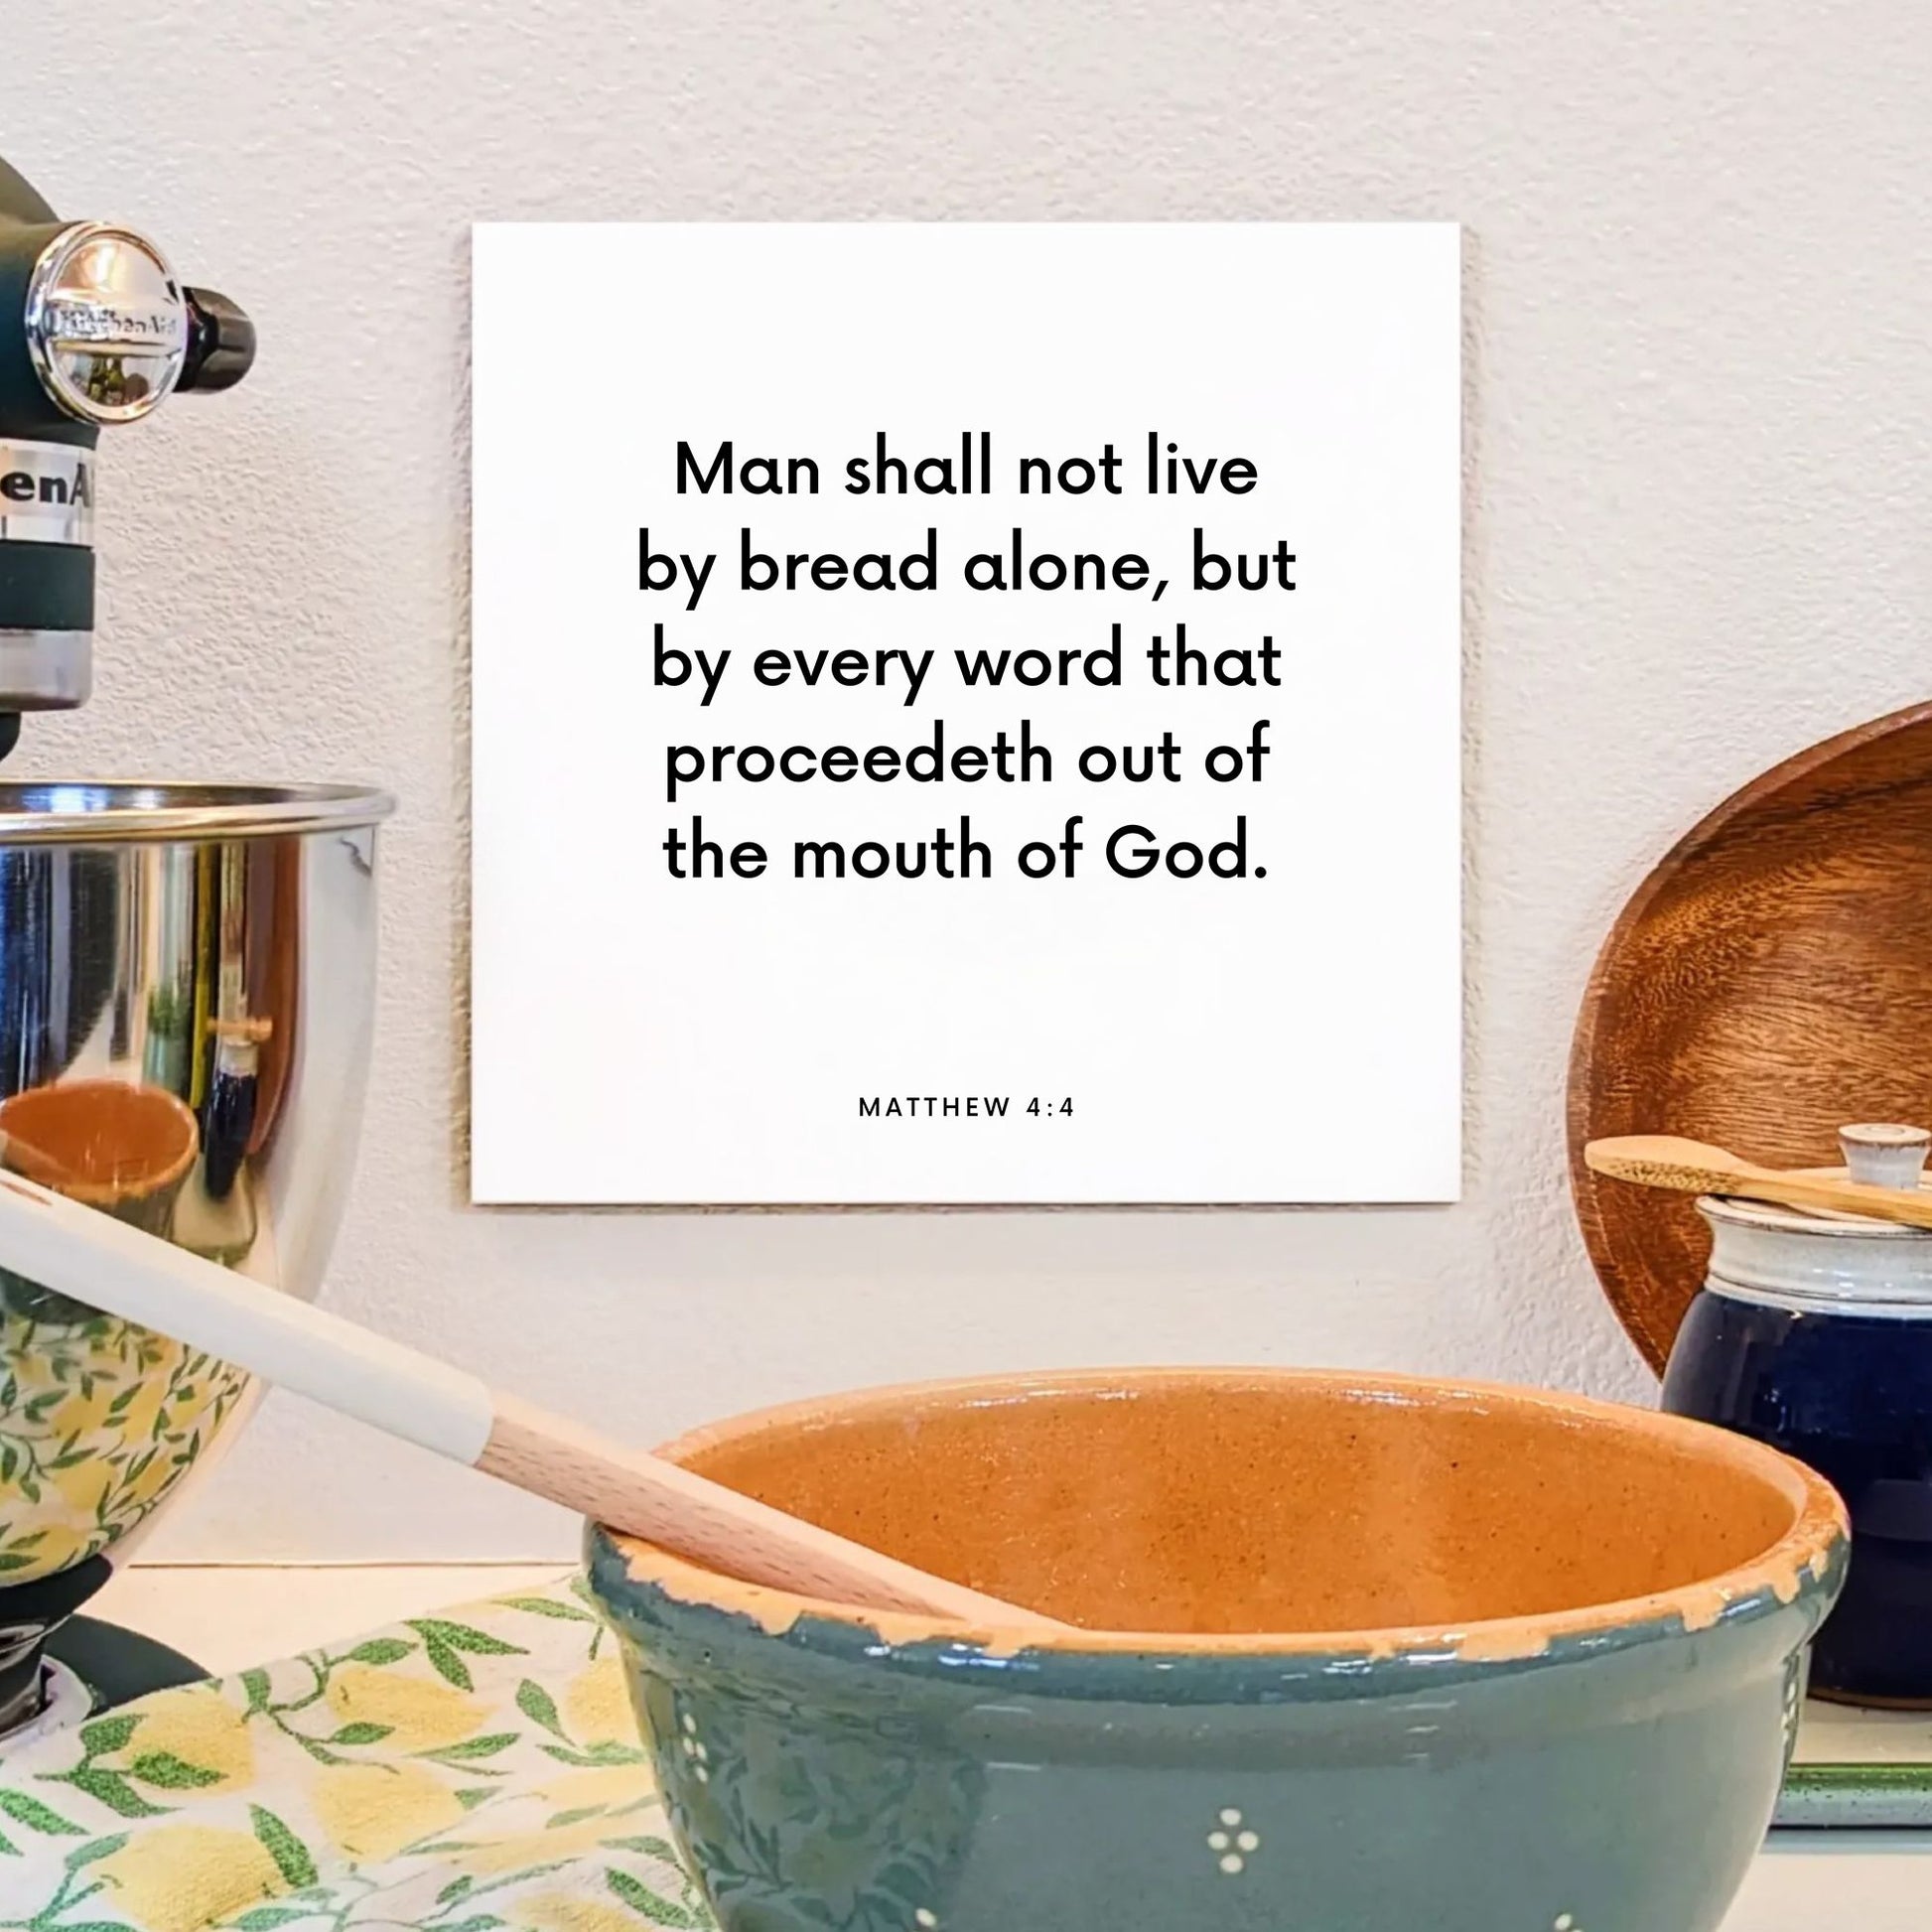 Kitchen mouting of the scripture tile for Matthew 4:4 - "Man shall not live by bread alone, but by every word"